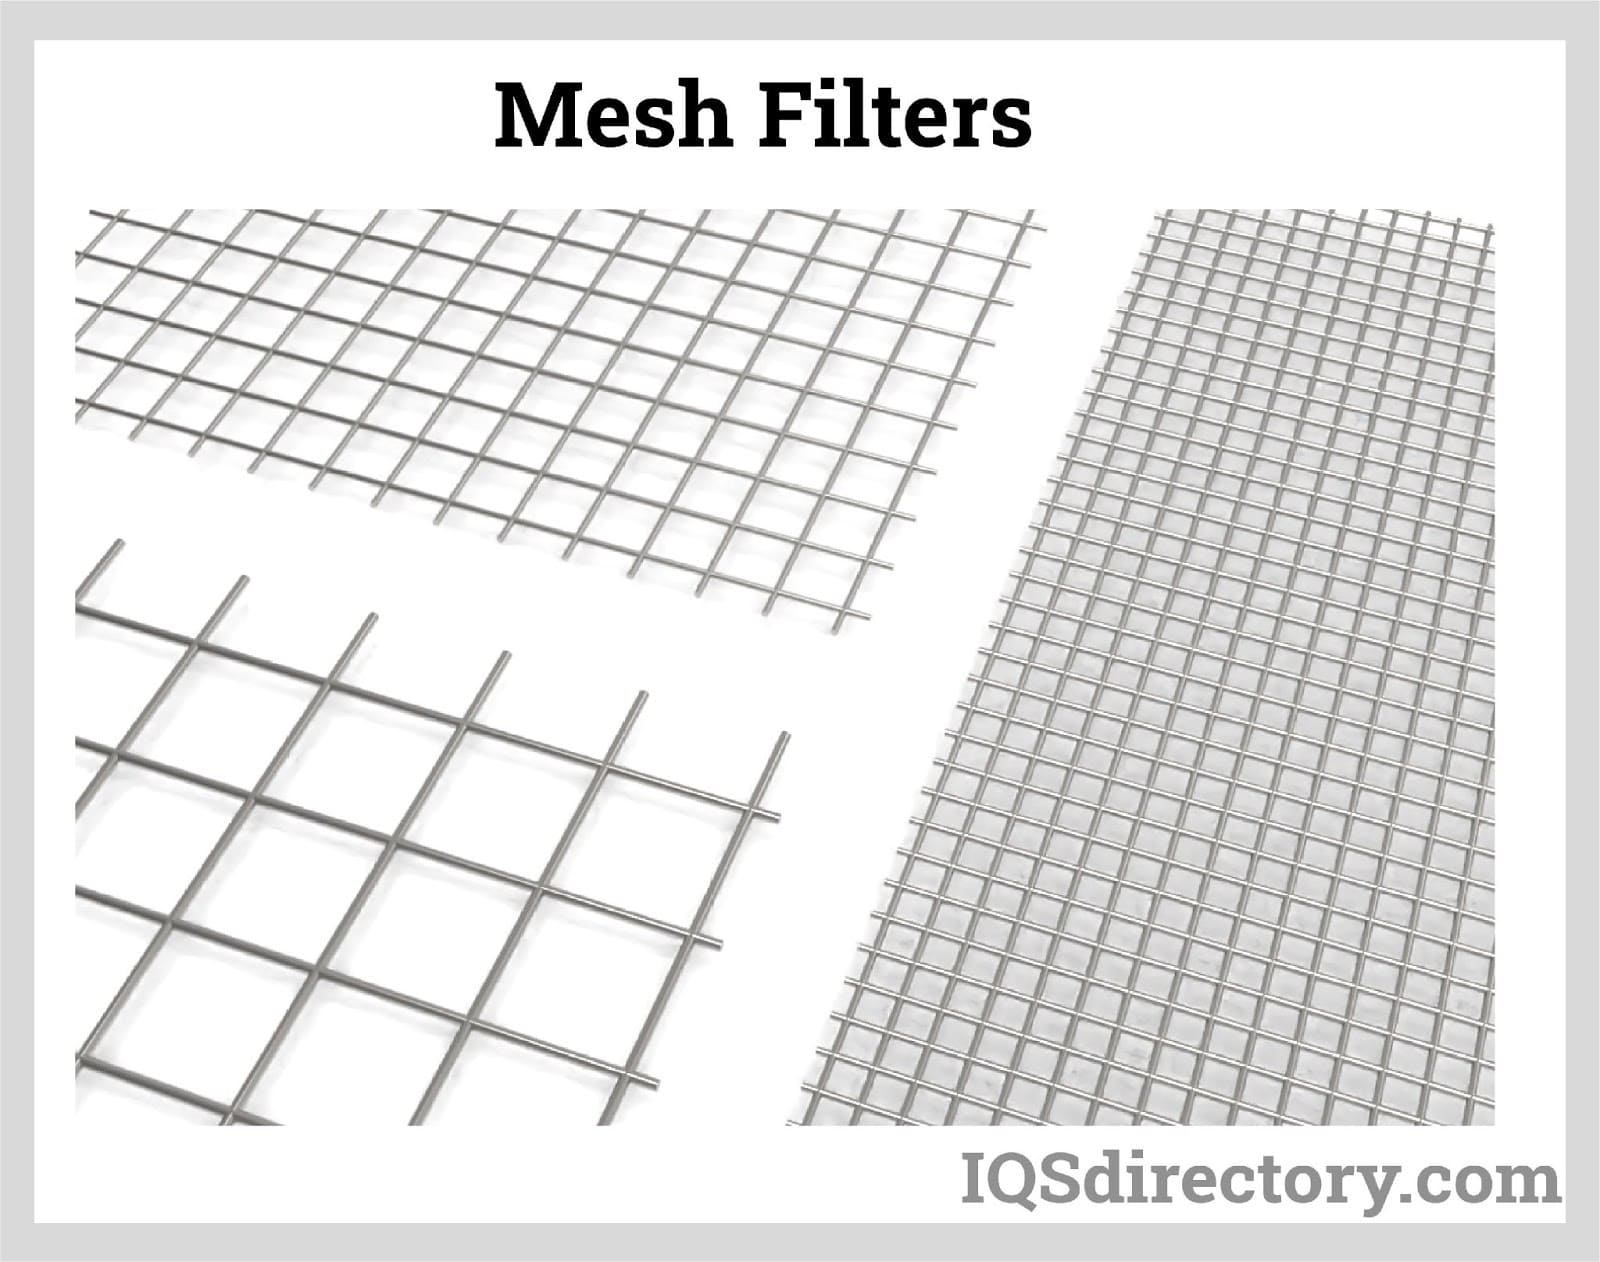 Metal Mesh: Types, Materials, Patterns, Benefits and Applications